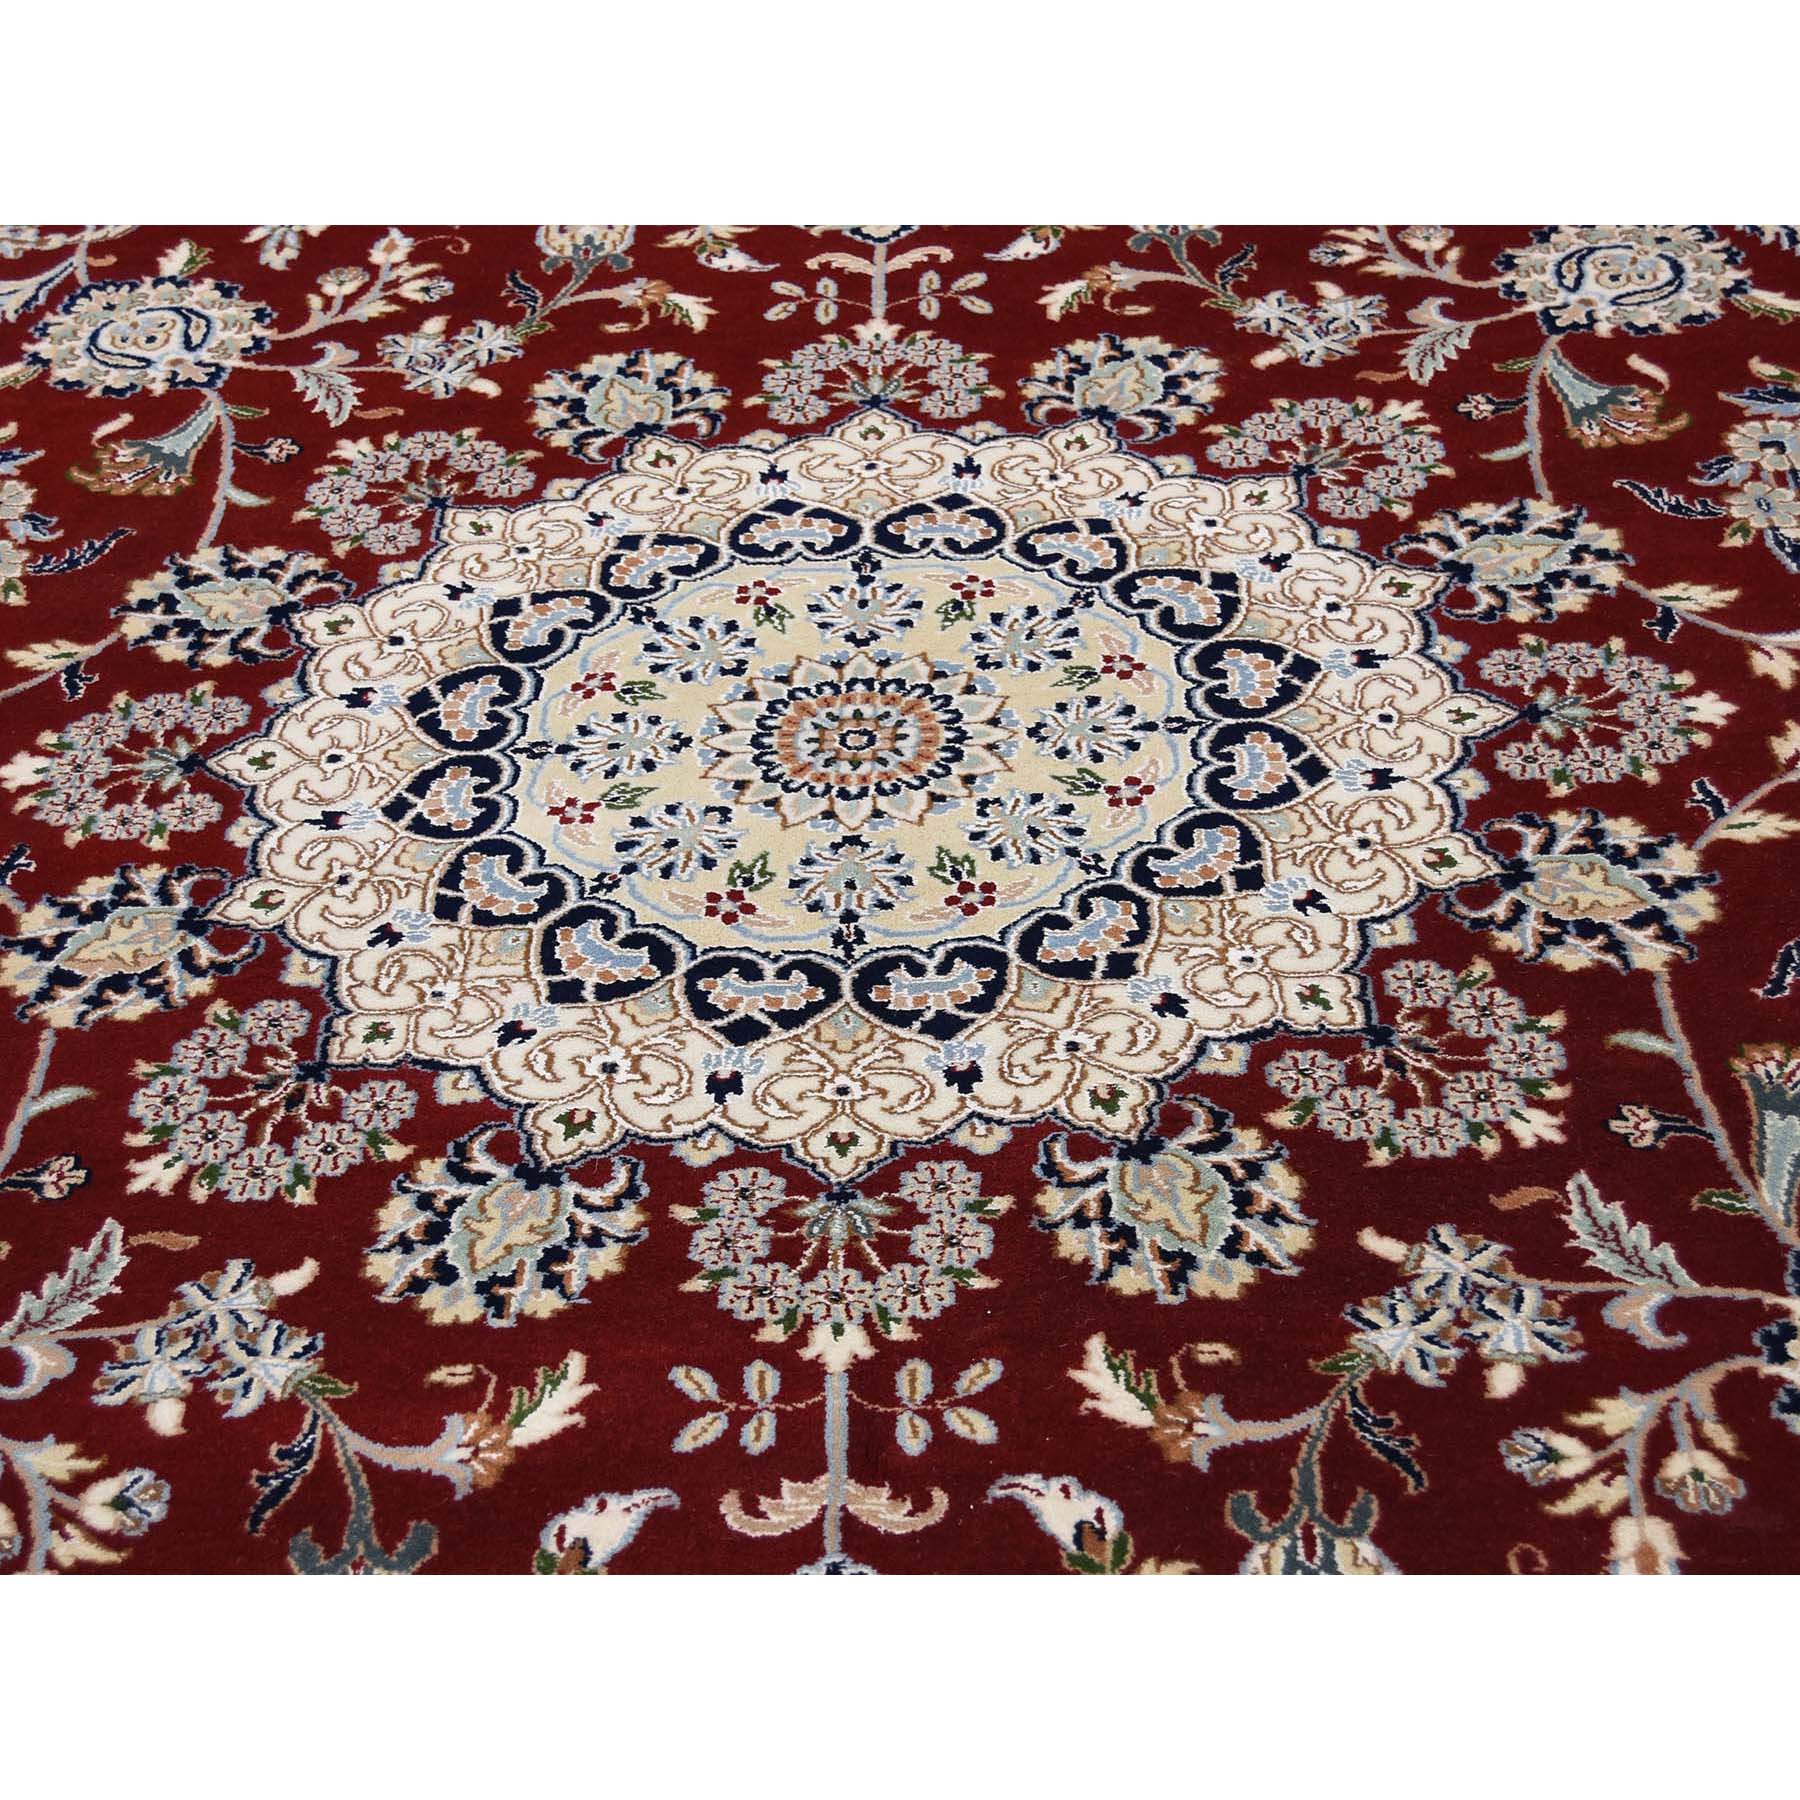 9-9 x14- 250 KPSI Red Wool and Silk Nain Hand Knotted Oriental Rug 